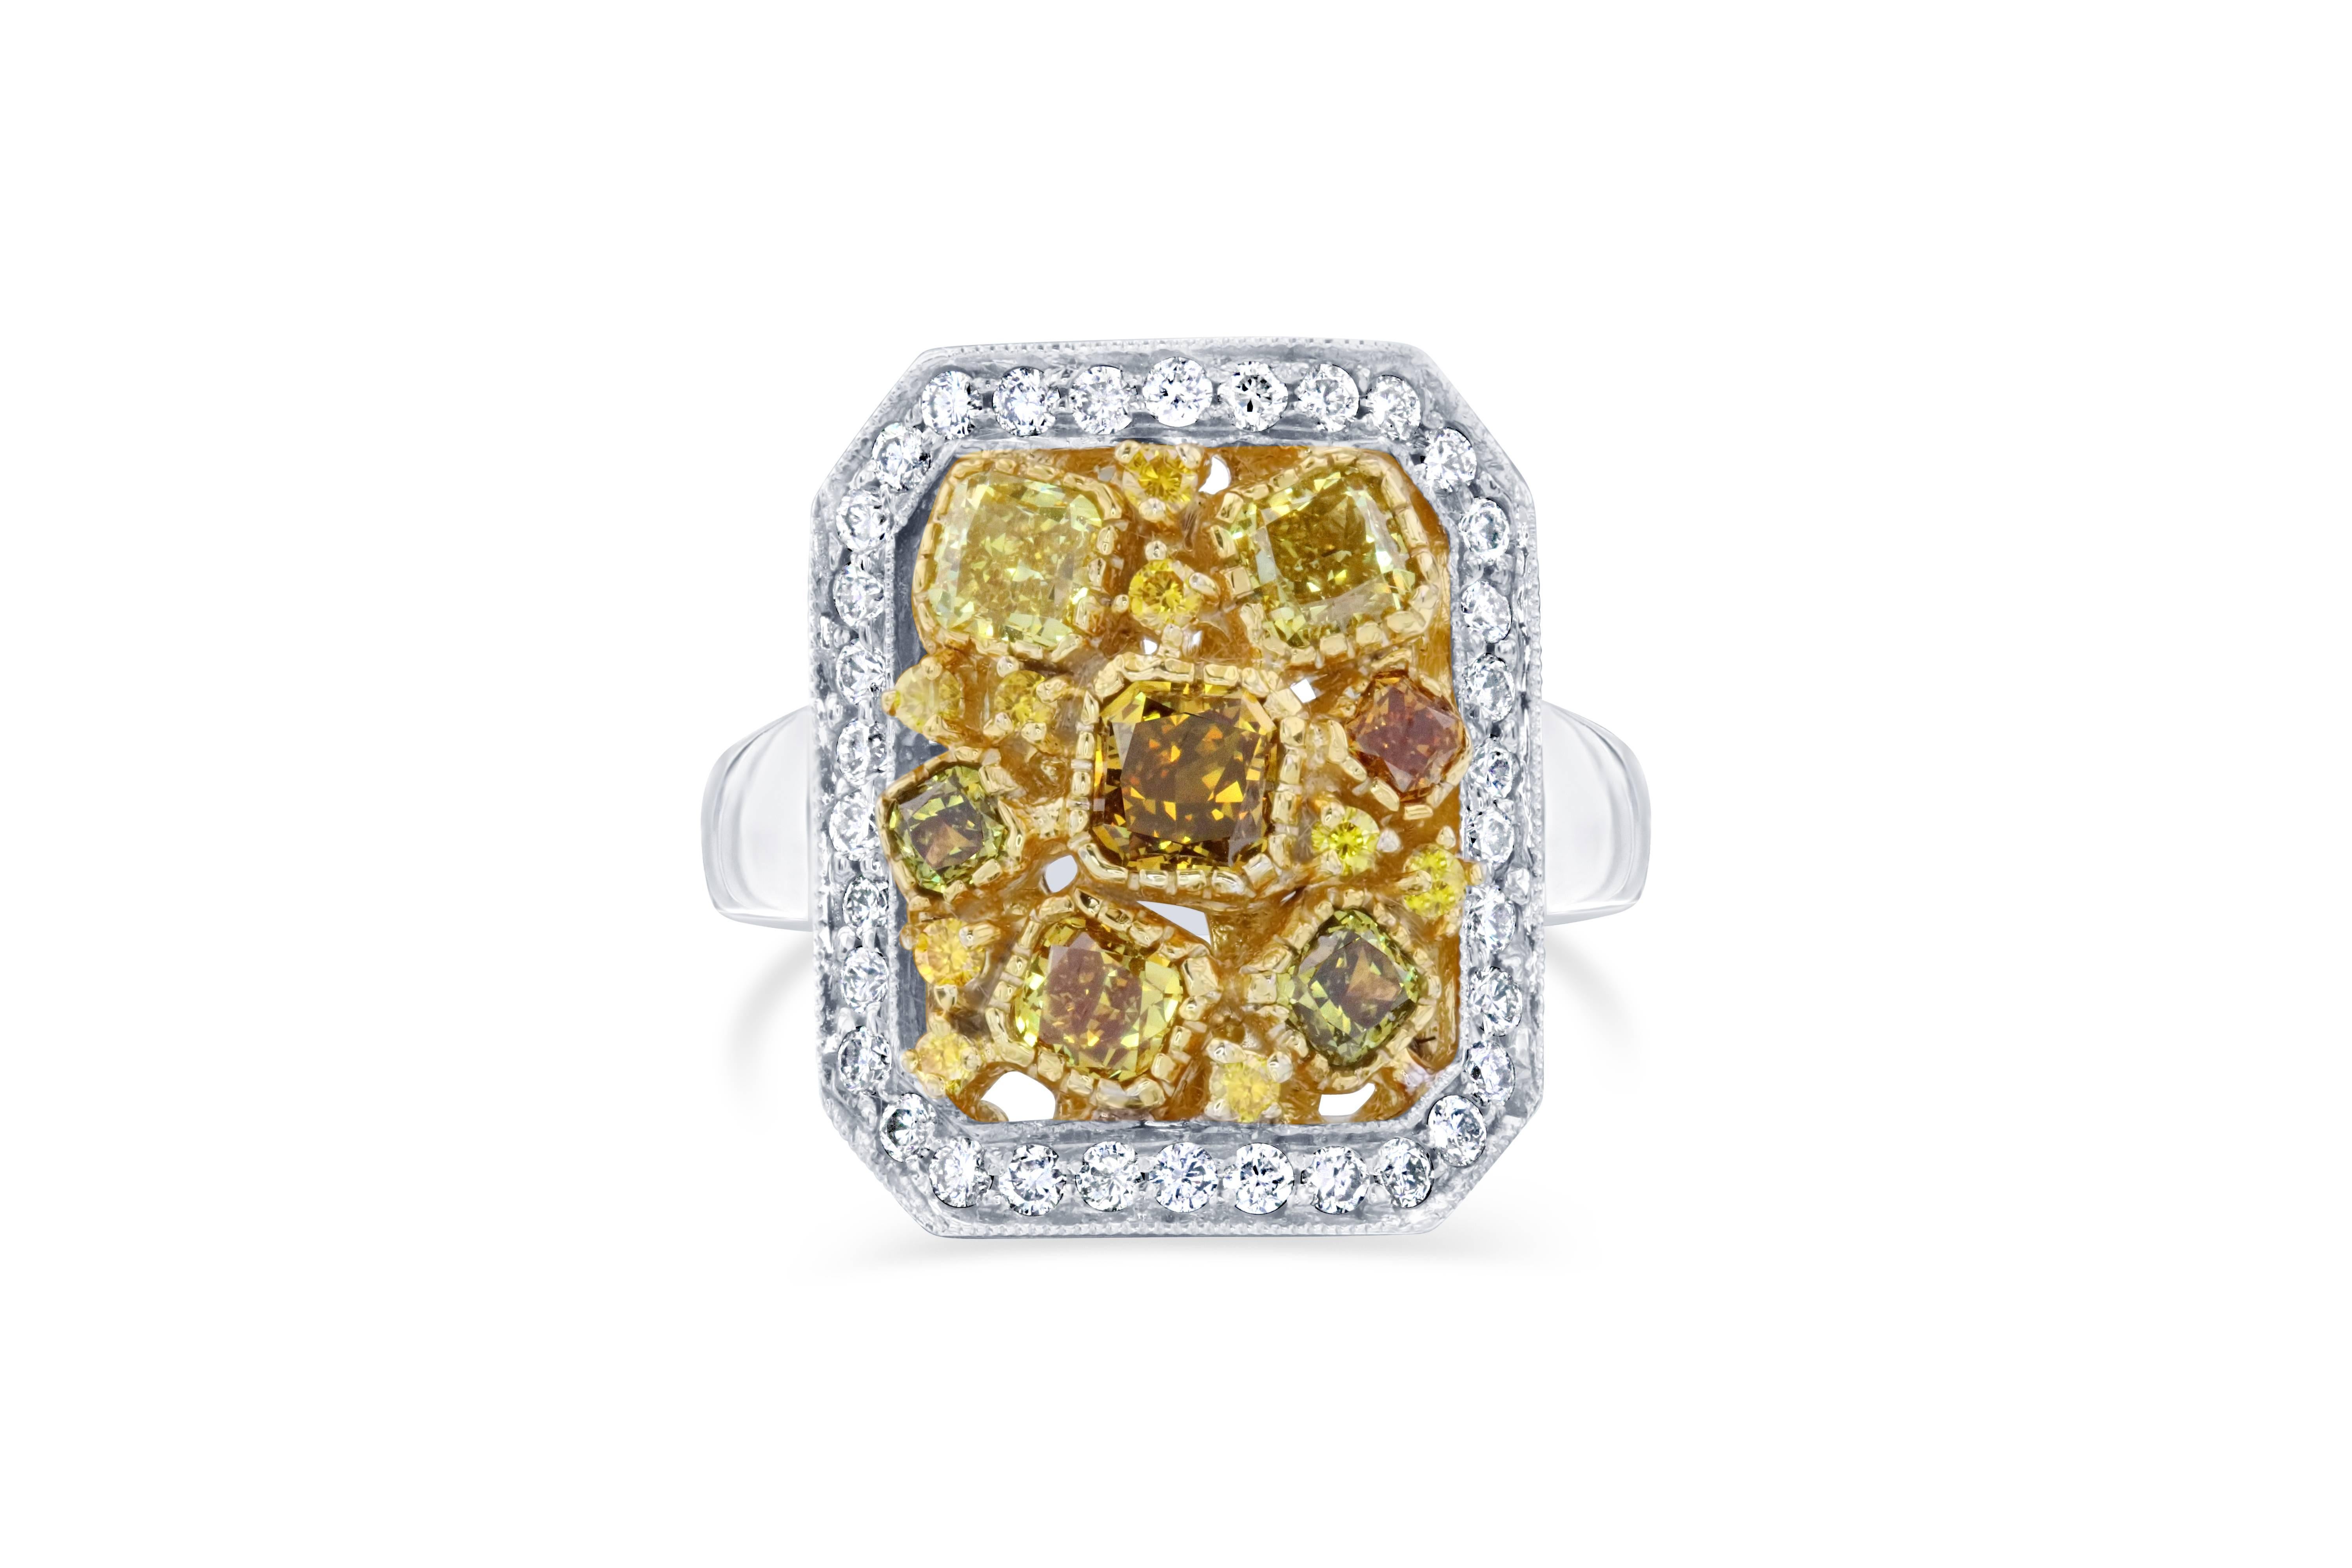 2.26 Carat Fancy Color Diamond 18 Karat White Gold Cocktail Ring

This magnificent beauty has Fancy Color Cushion Cut Natural Diamonds floating around the ring. The 7 Fancy Color Cushion Cuts weigh 1.72 Carats. It is embellished with 9 Yellow Round